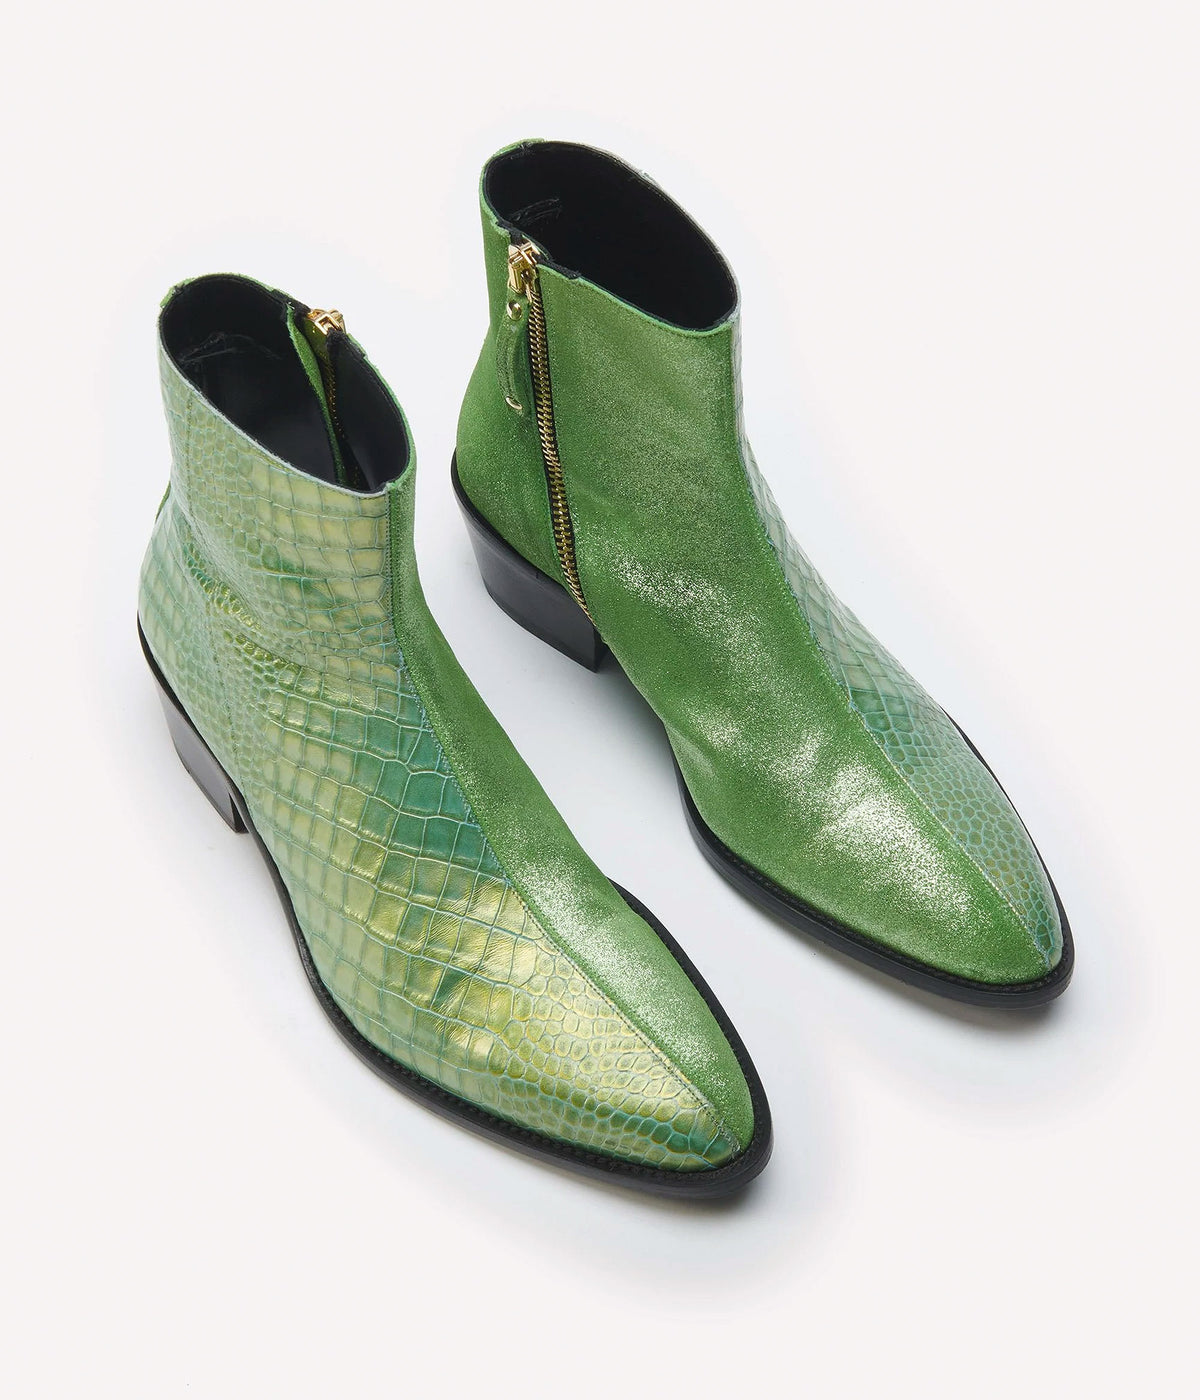 LUTHER BOOT GREEN